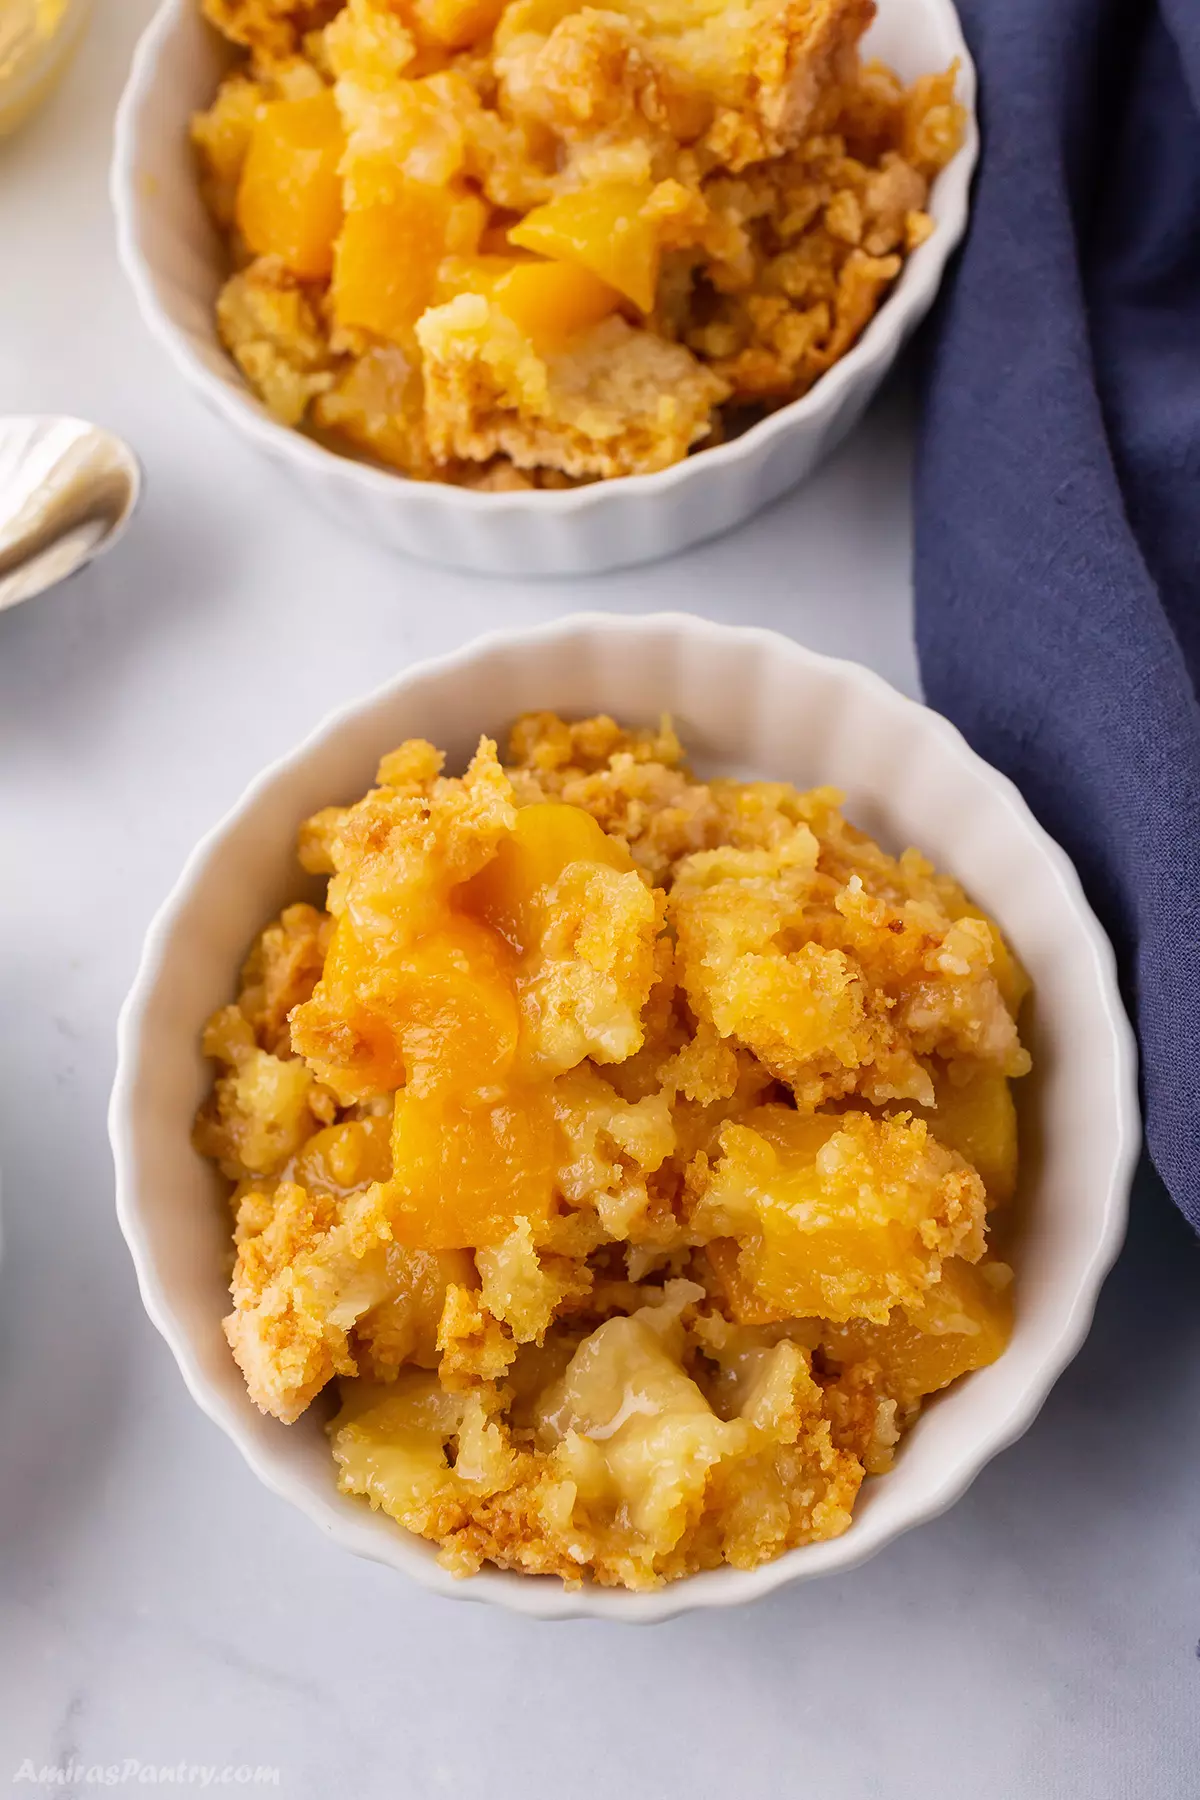 Two small serving bowls of peach cobbler.